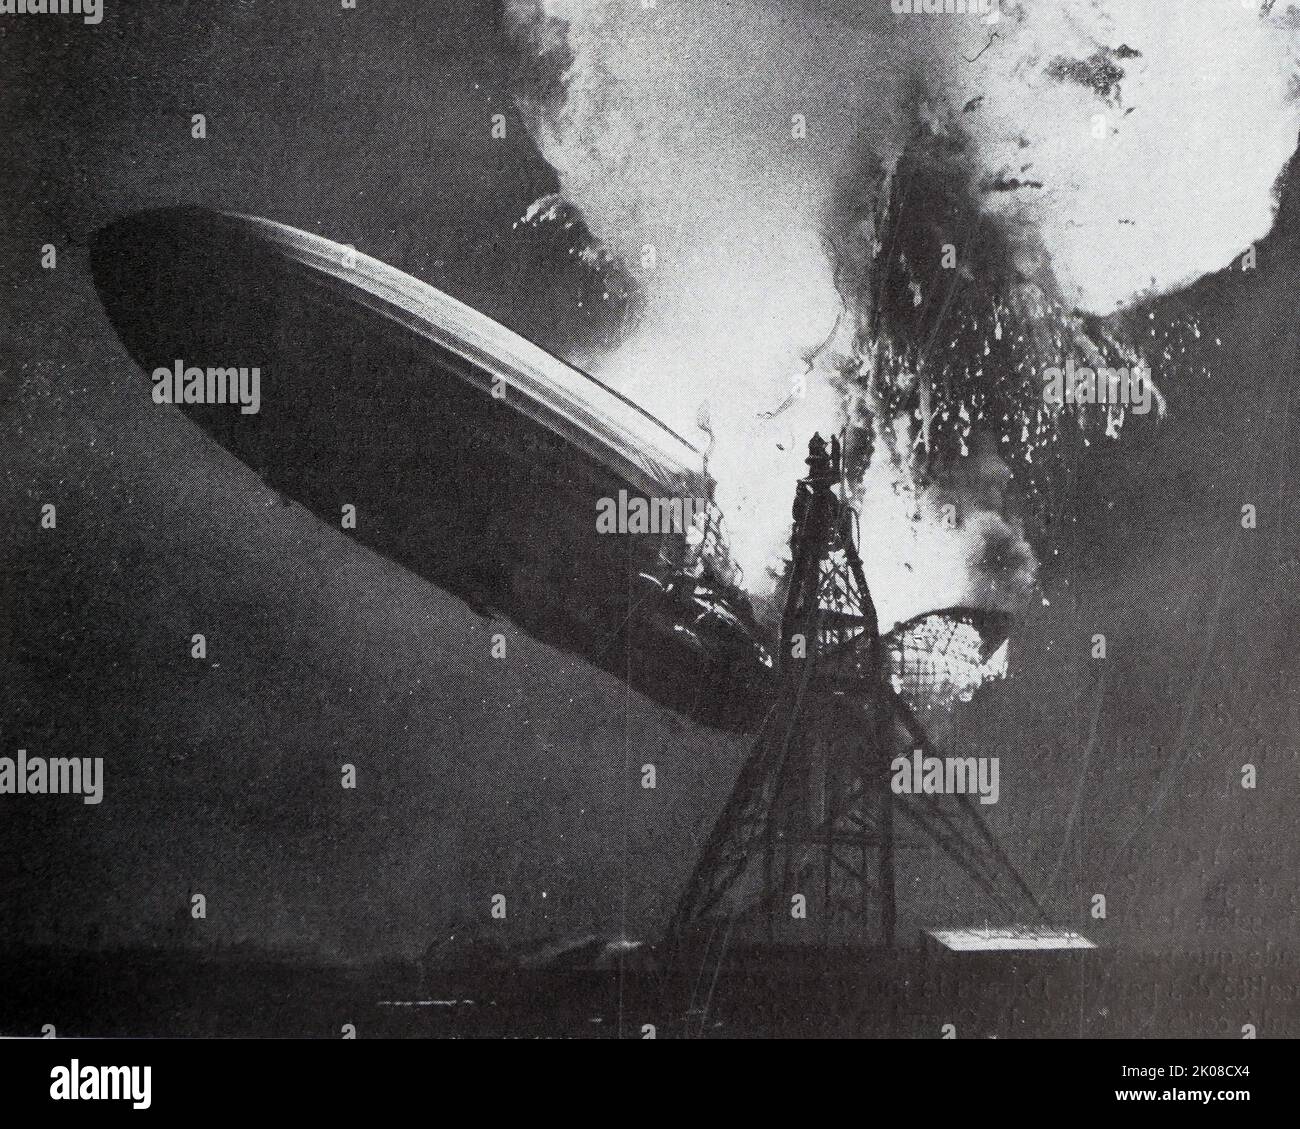 The Hindenburg disaster was an airship accident that occurred on May 6, 1937, in Manchester Township, New Jersey, United States. The German passenger airship LZ 129 Hindenburg caught fire and was destroyed during its attempt to dock with its mooring mast at Naval Air Station Lakehurst. The accident caused 35 fatalities from the 97 people on board and an additional fatality on the ground Stock Photo